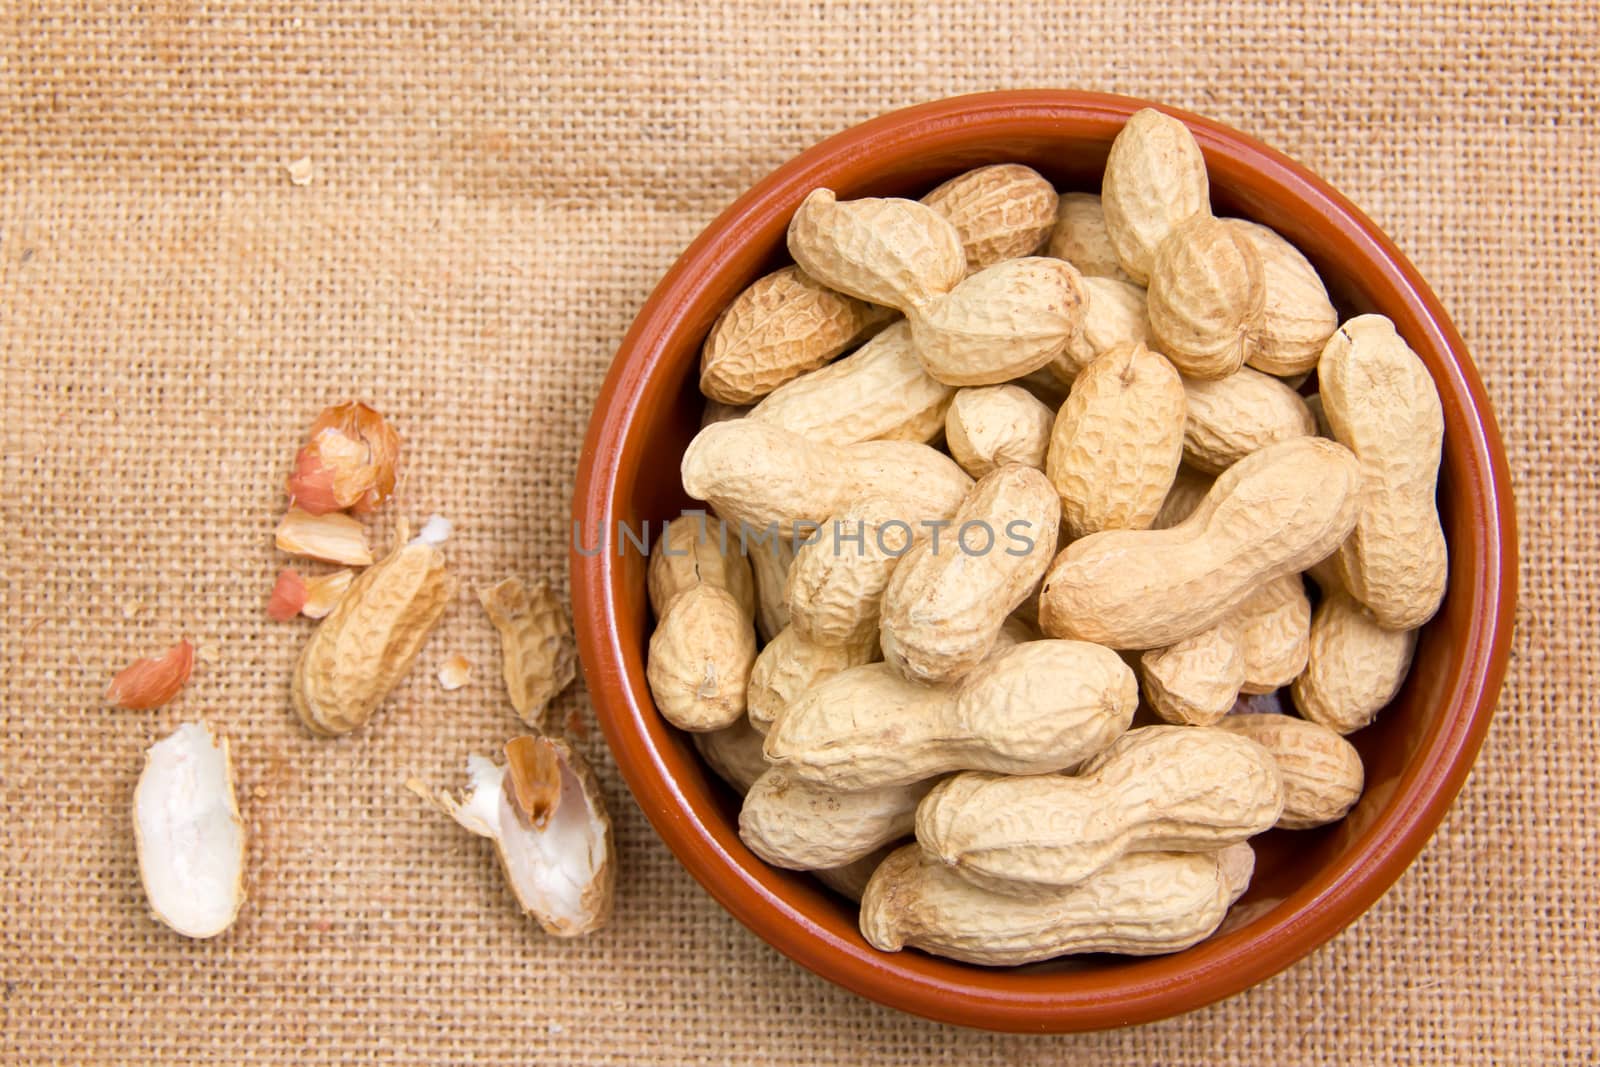 Peanuts in rustic bowl on jute mat seen from above